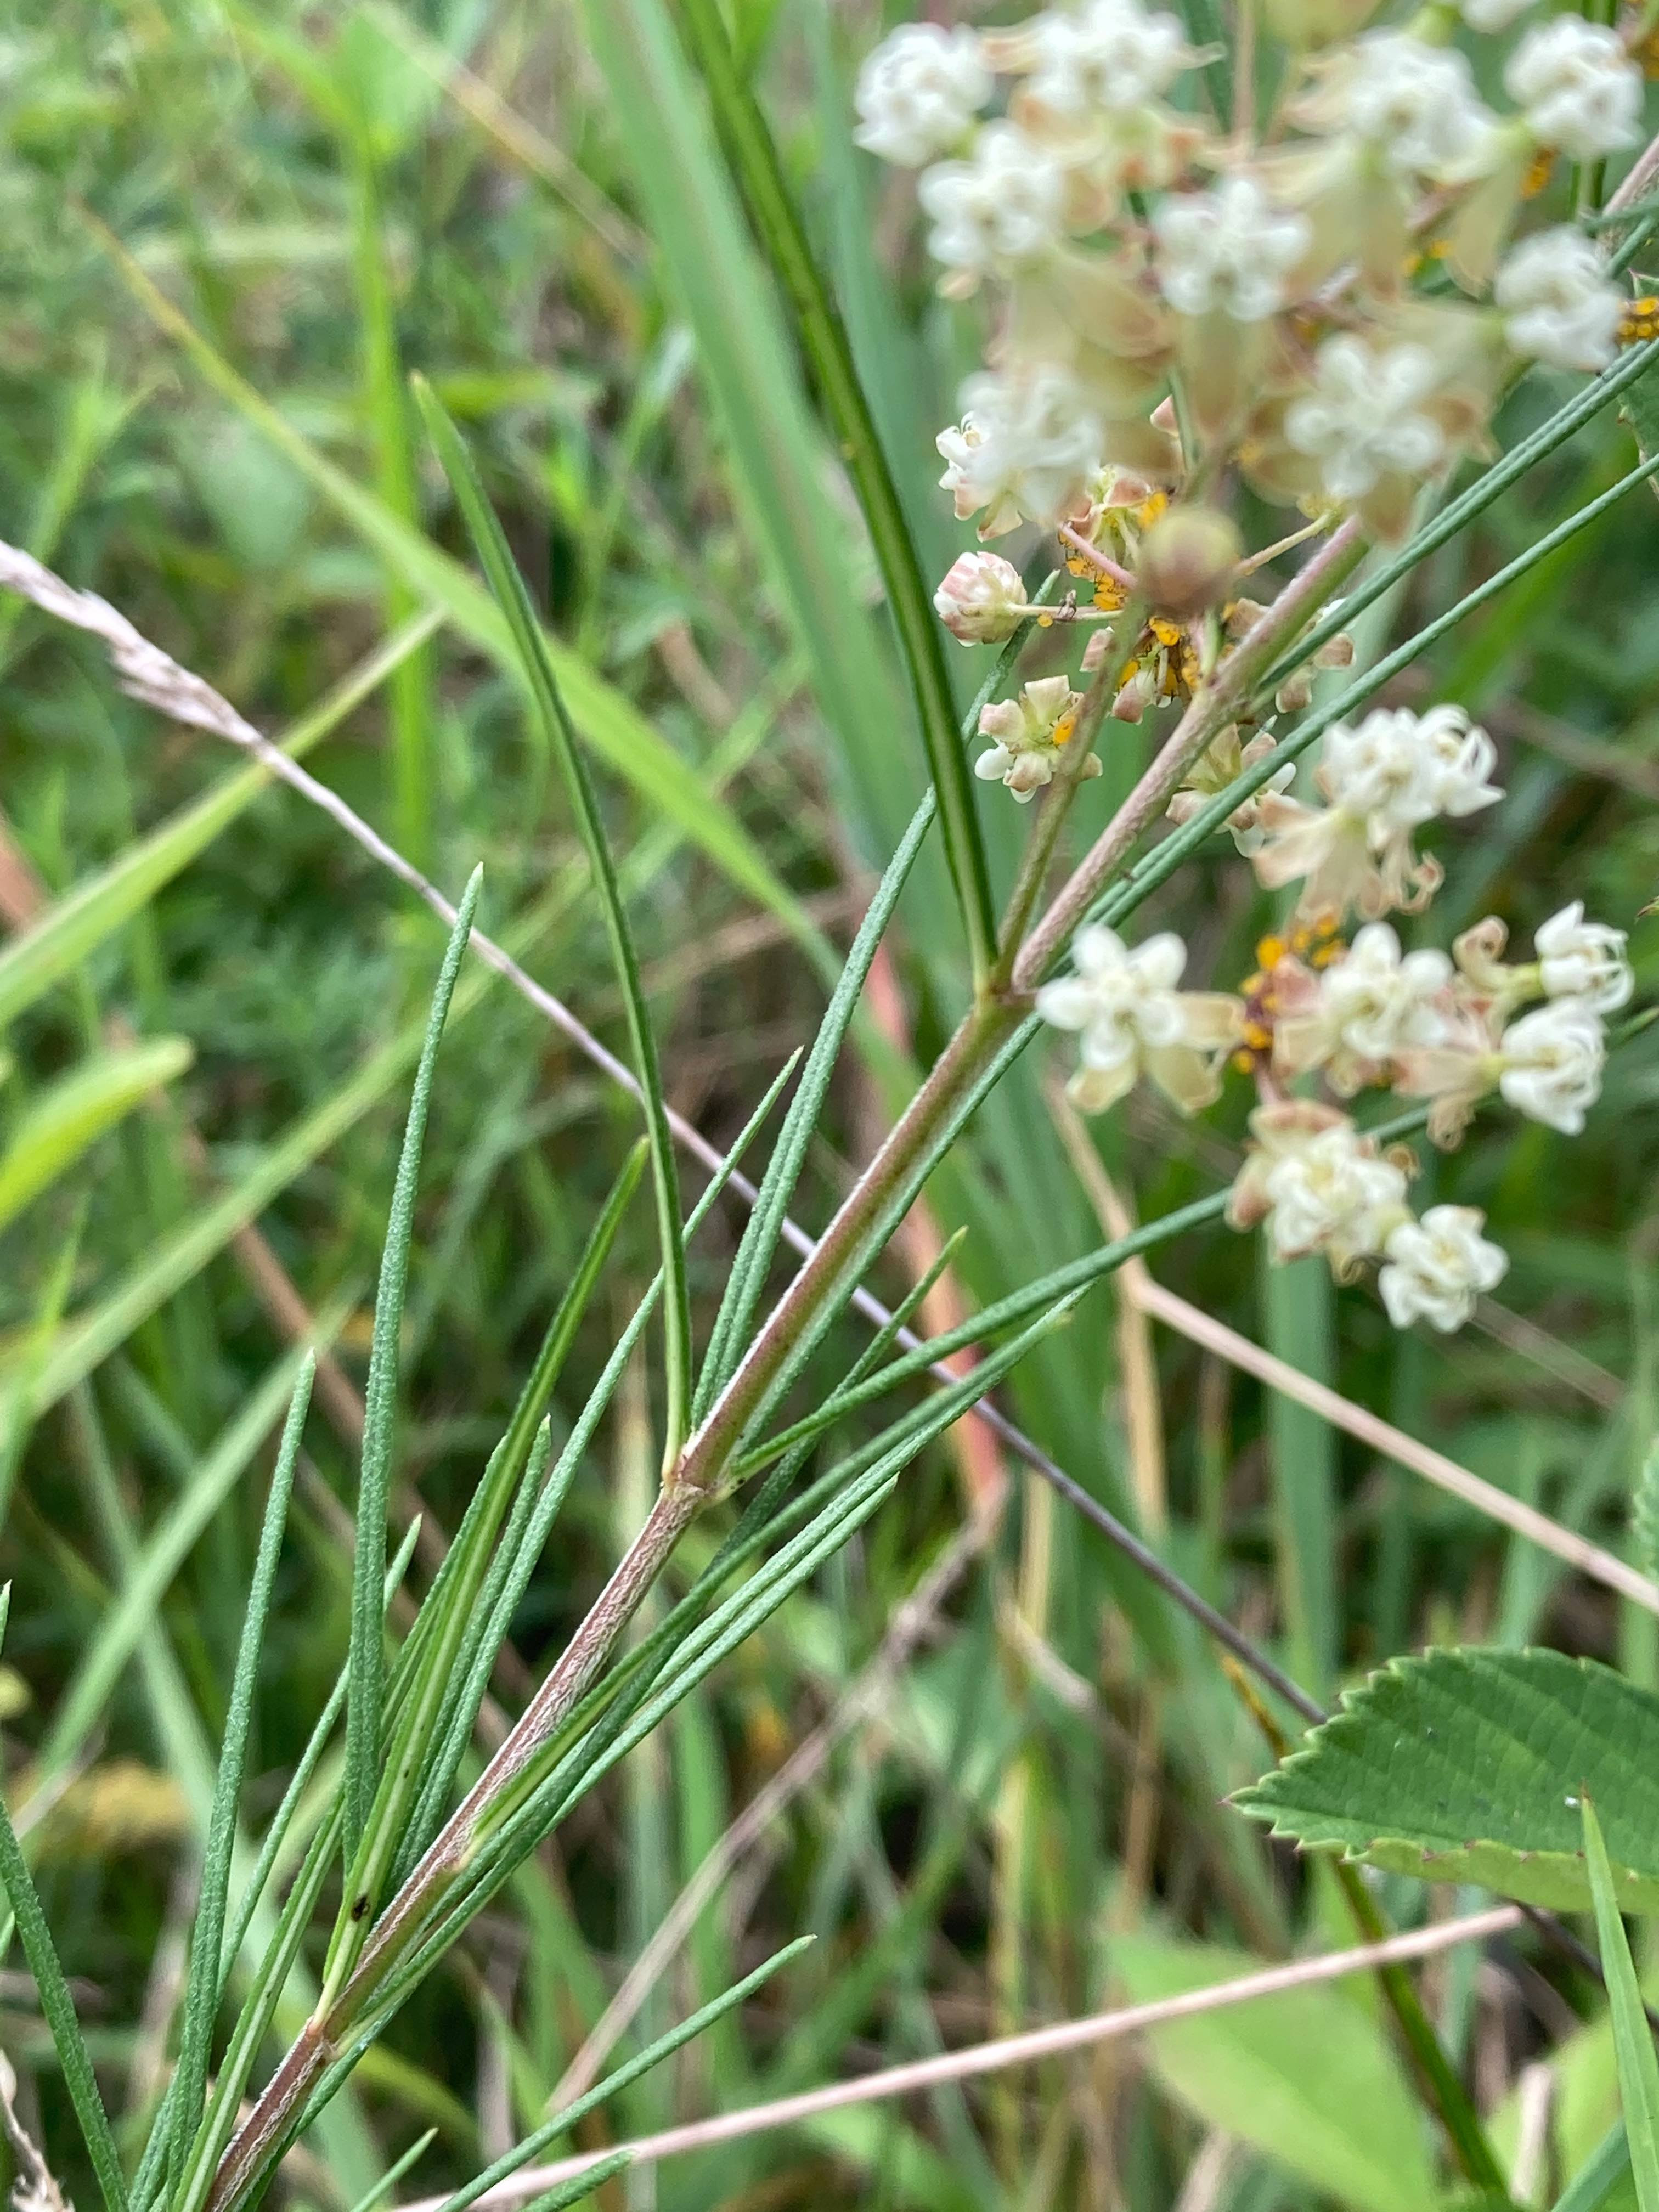 The Scientific Name is Asclepias verticillata. You will likely hear them called Whorled Milkweed. This picture shows the Narrow linear, whorled leaves. of Asclepias verticillata